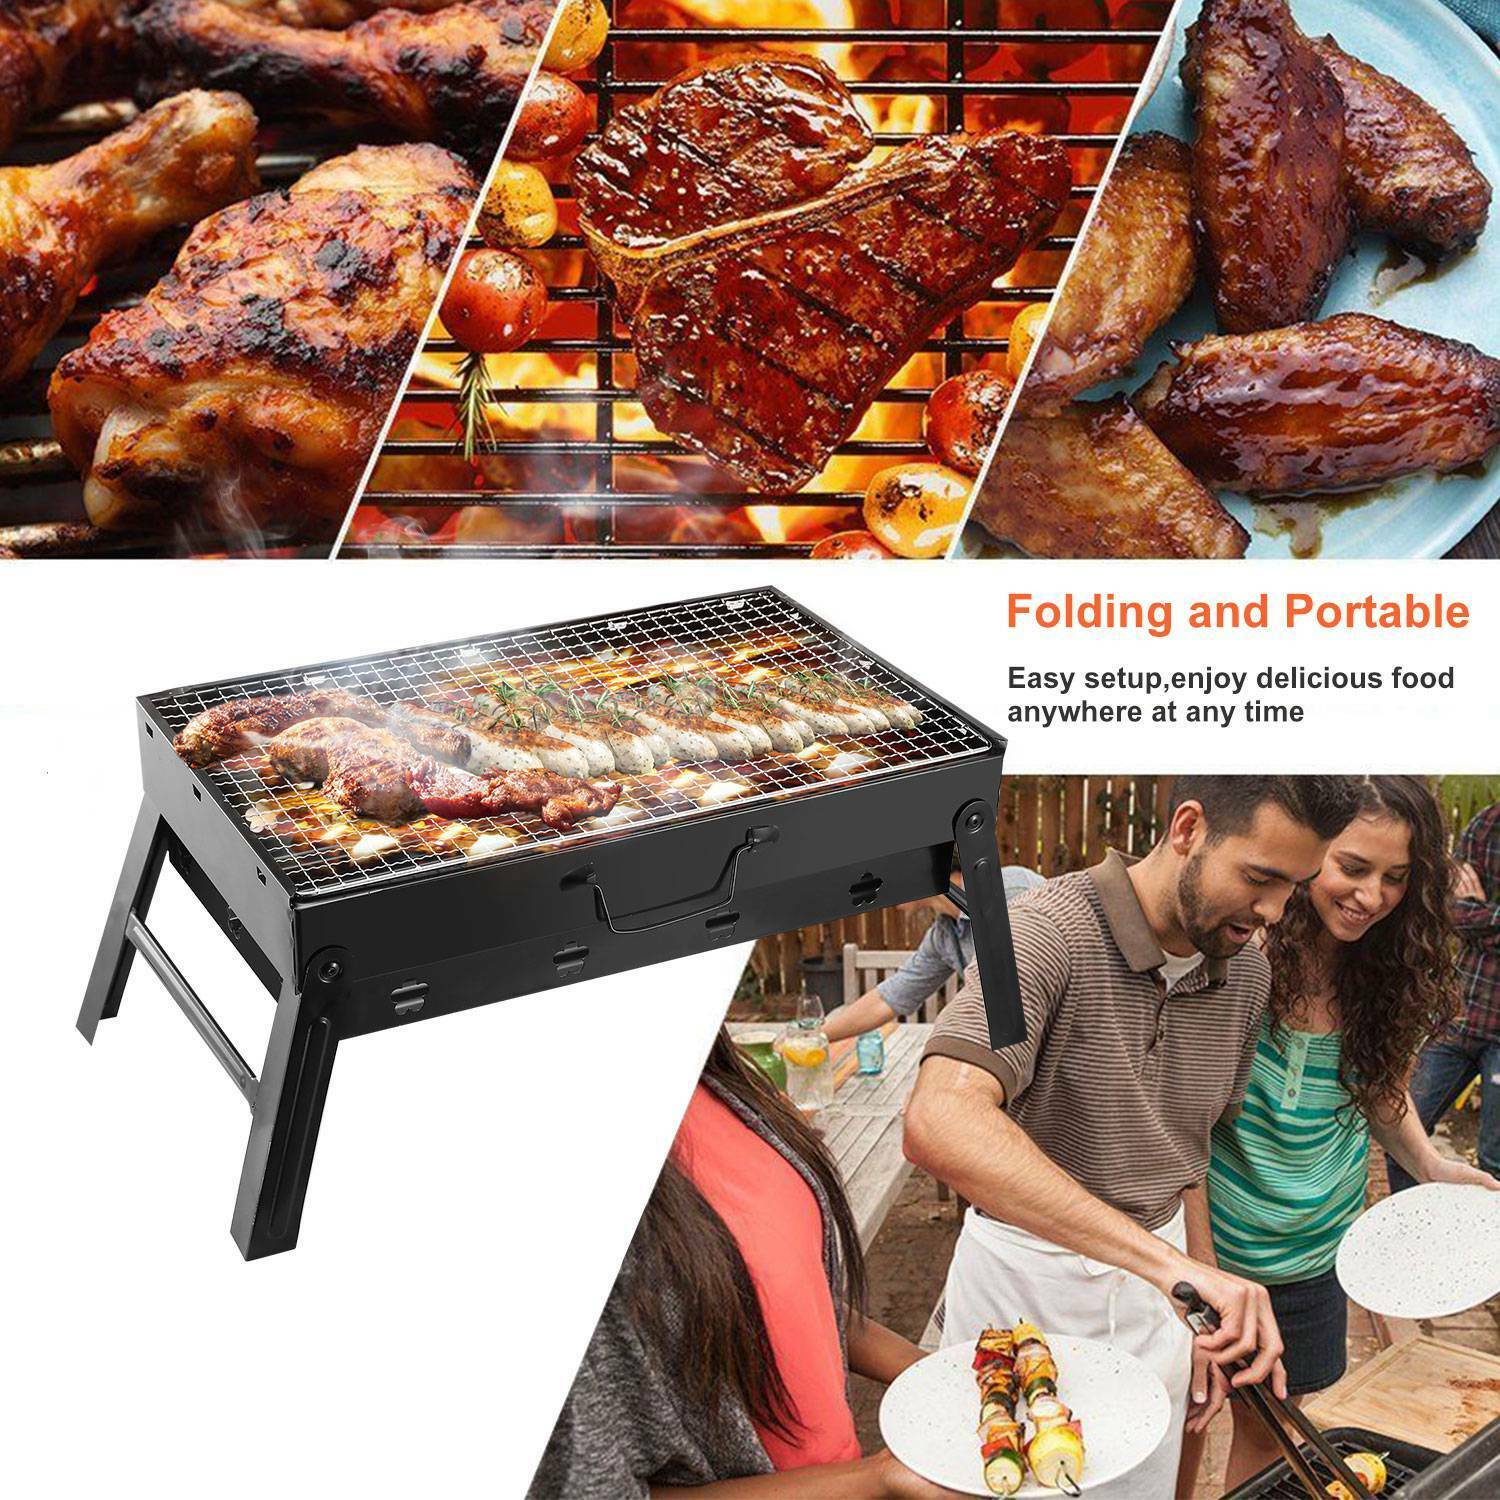 YouLoveIt Foldable BBQ Grill Camping Barbecue Smoker Portable Stainless Steel Smoker BBQ, Charcoal Grill for Picnic Garden Terrace Camping Travel, 17.7x11.0x8.7" - image 1 of 8